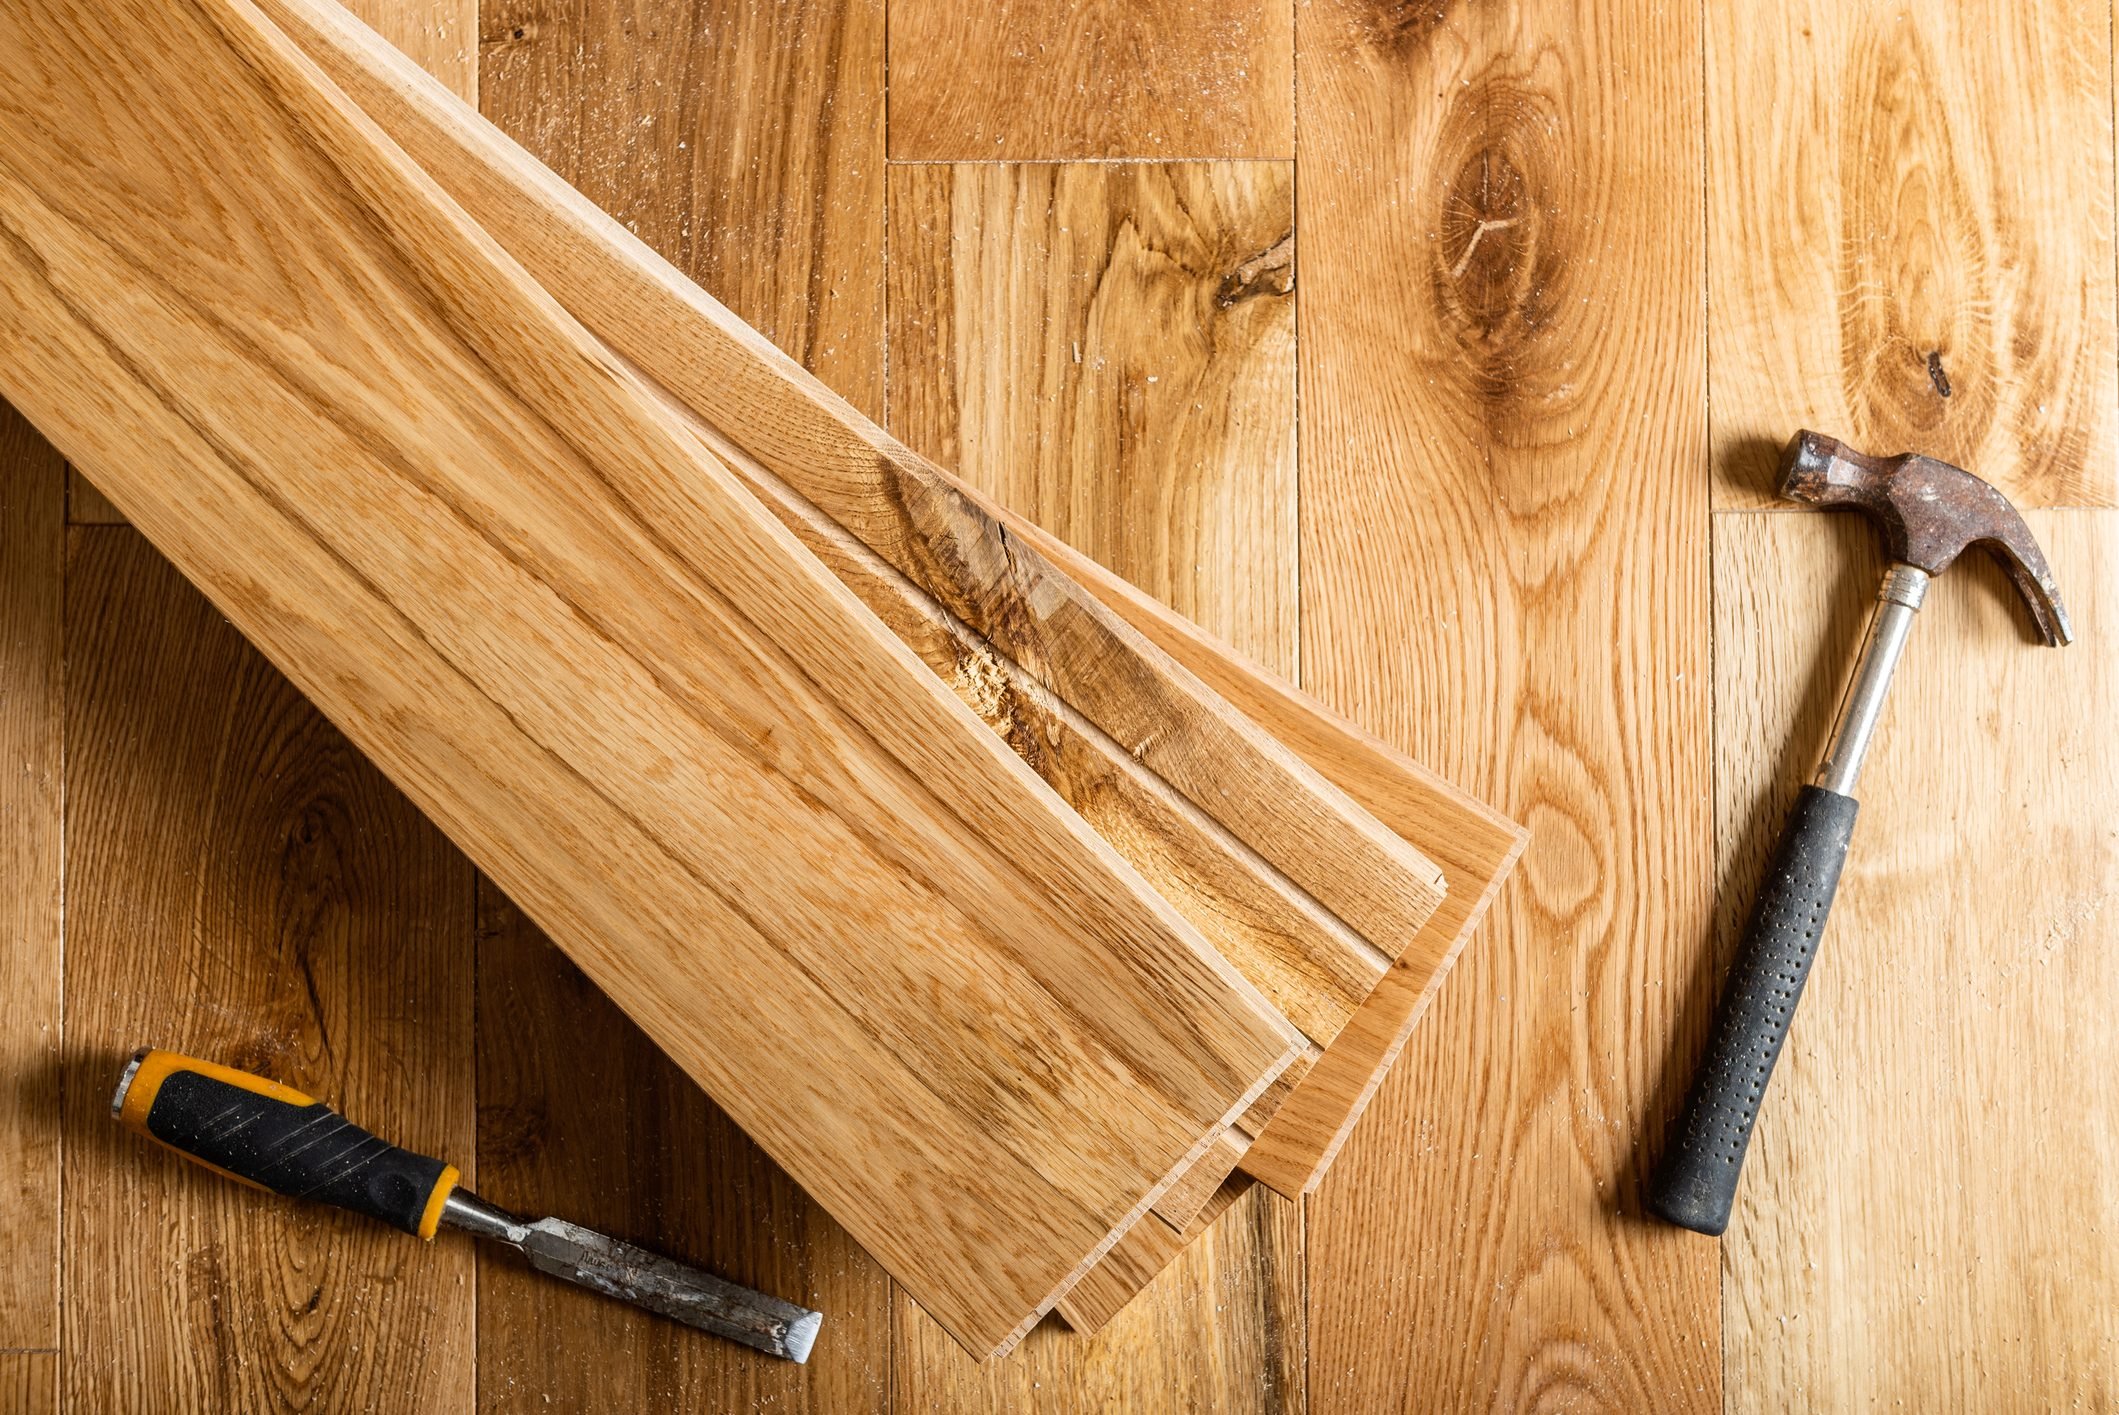 17 Most Common Carpentry Mistakes Beginners Make